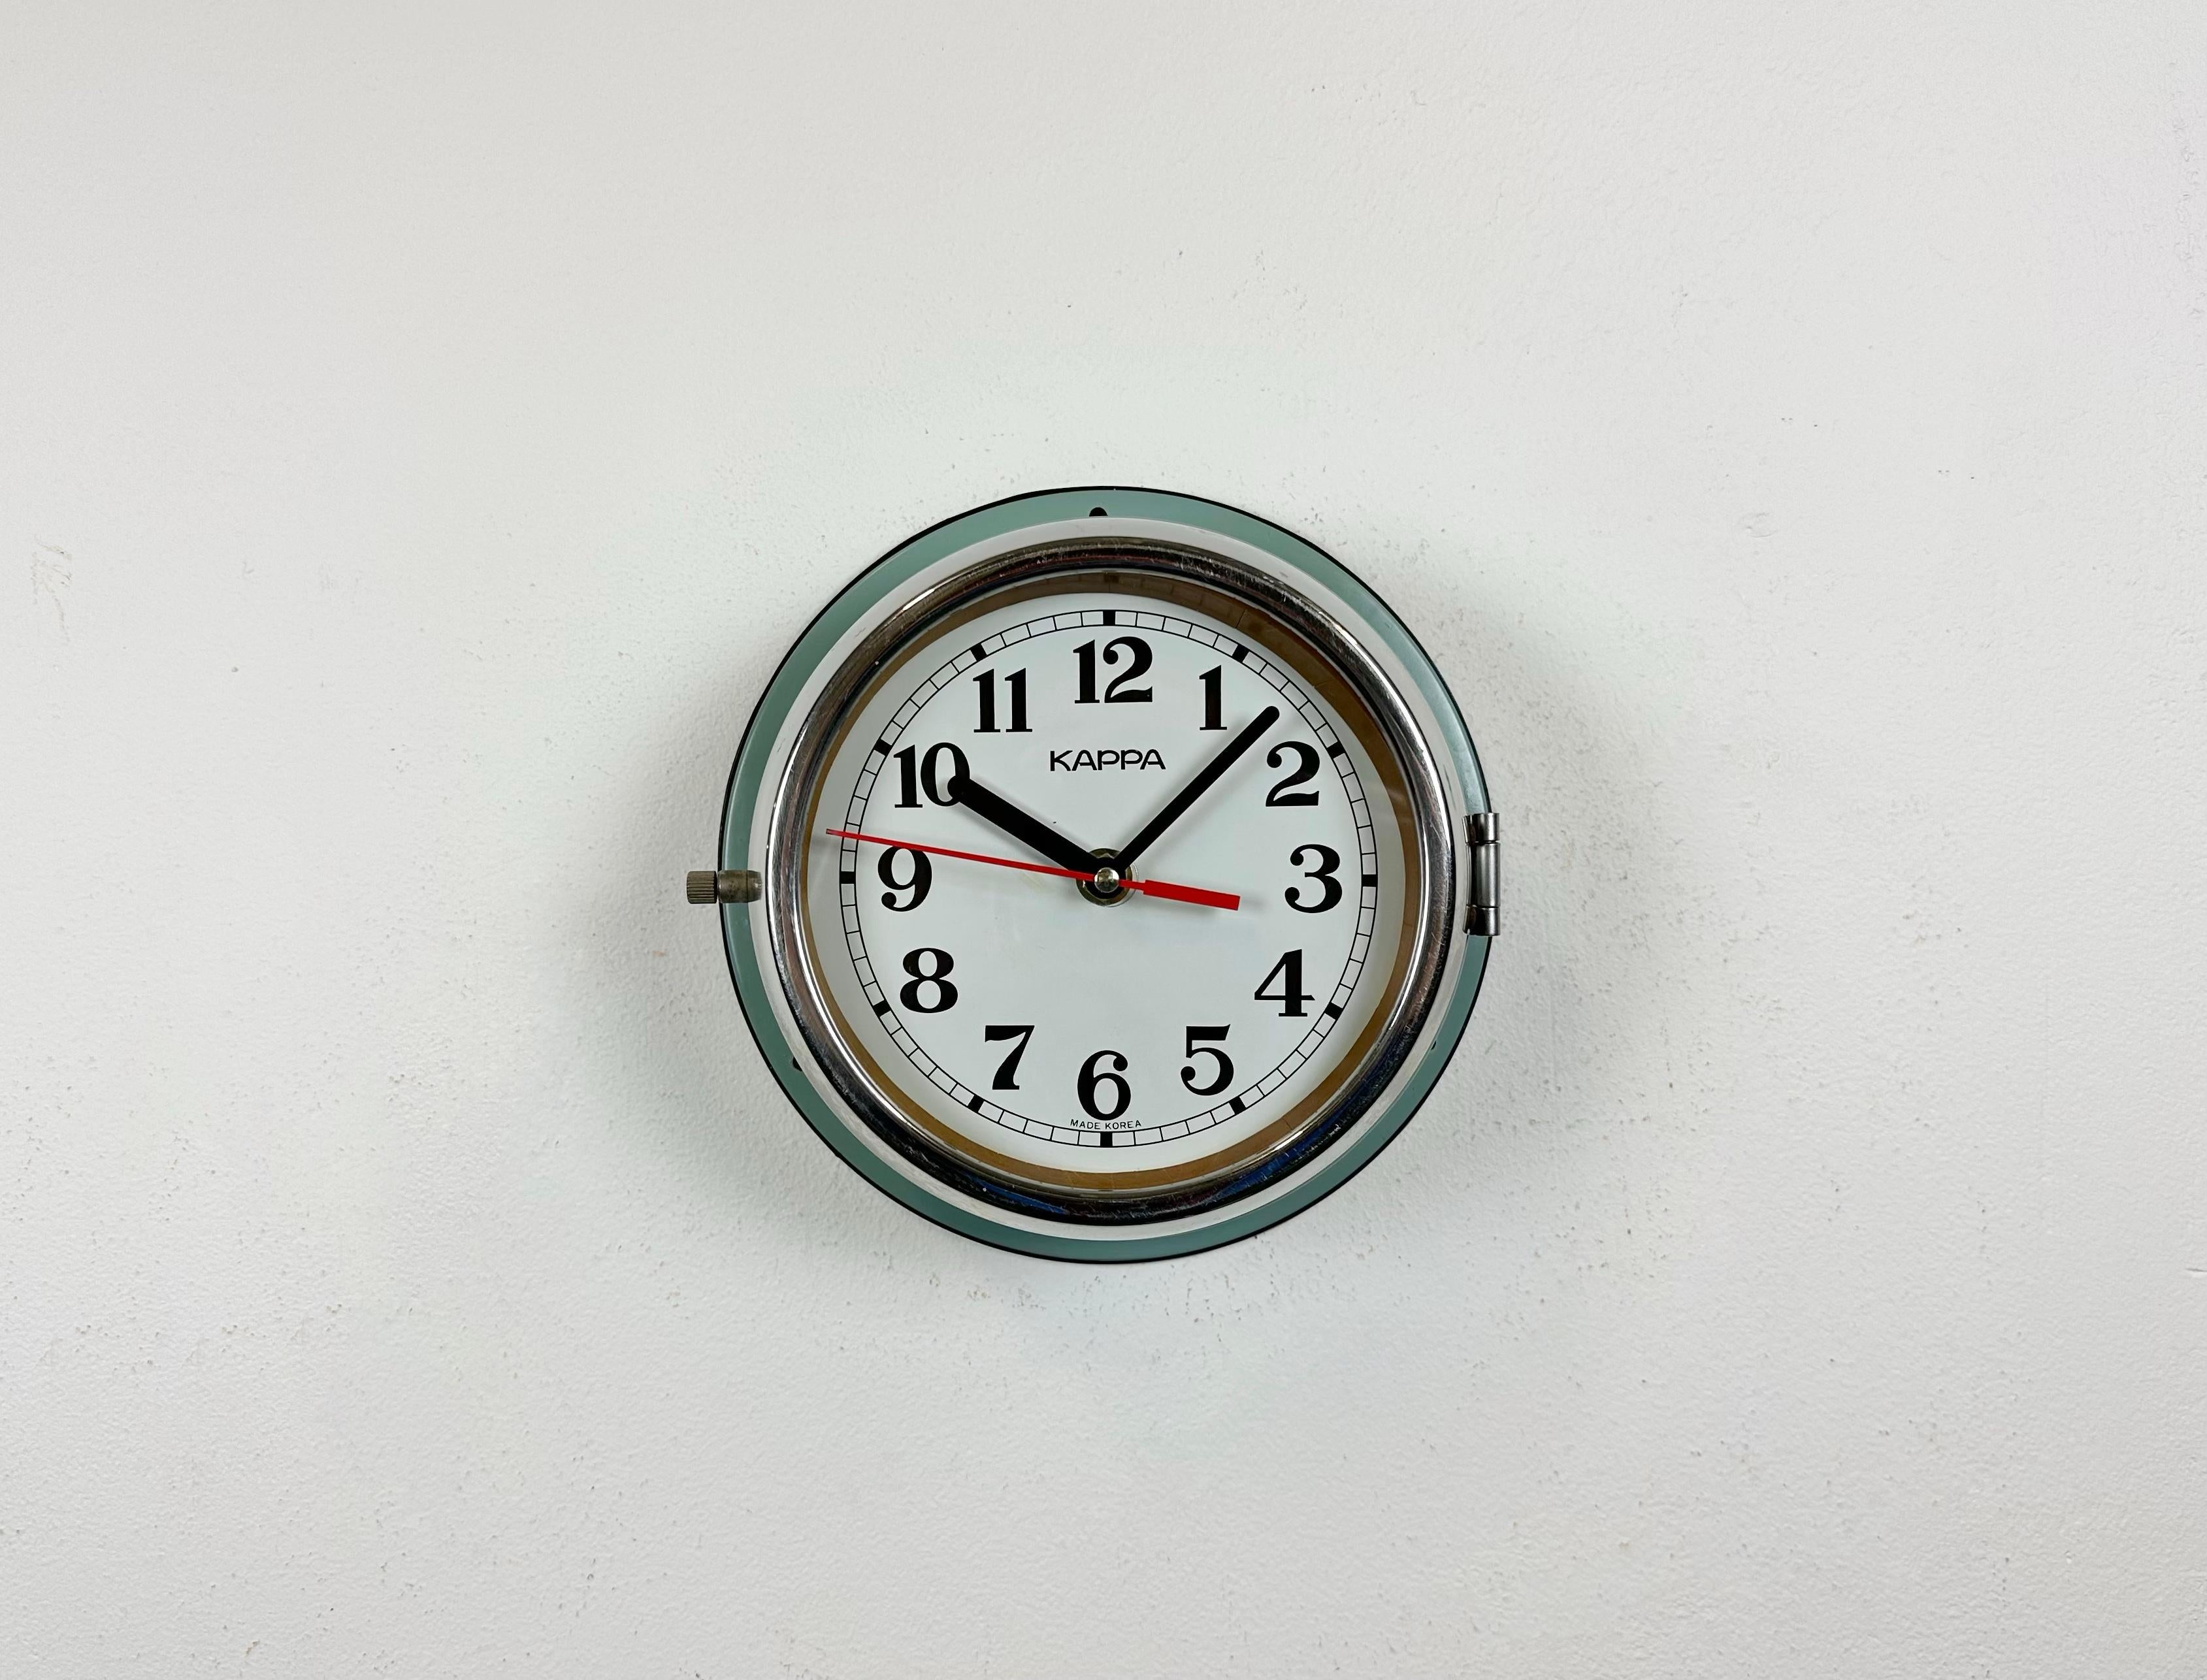 Vintage Kappa navy slave clock designed during the 1970s and produced till 1990s. These clocks were used on large Korean tankers and cargo ships. It features a green metal body, a metal dial and a clear glass cover with chrome frame. This item has